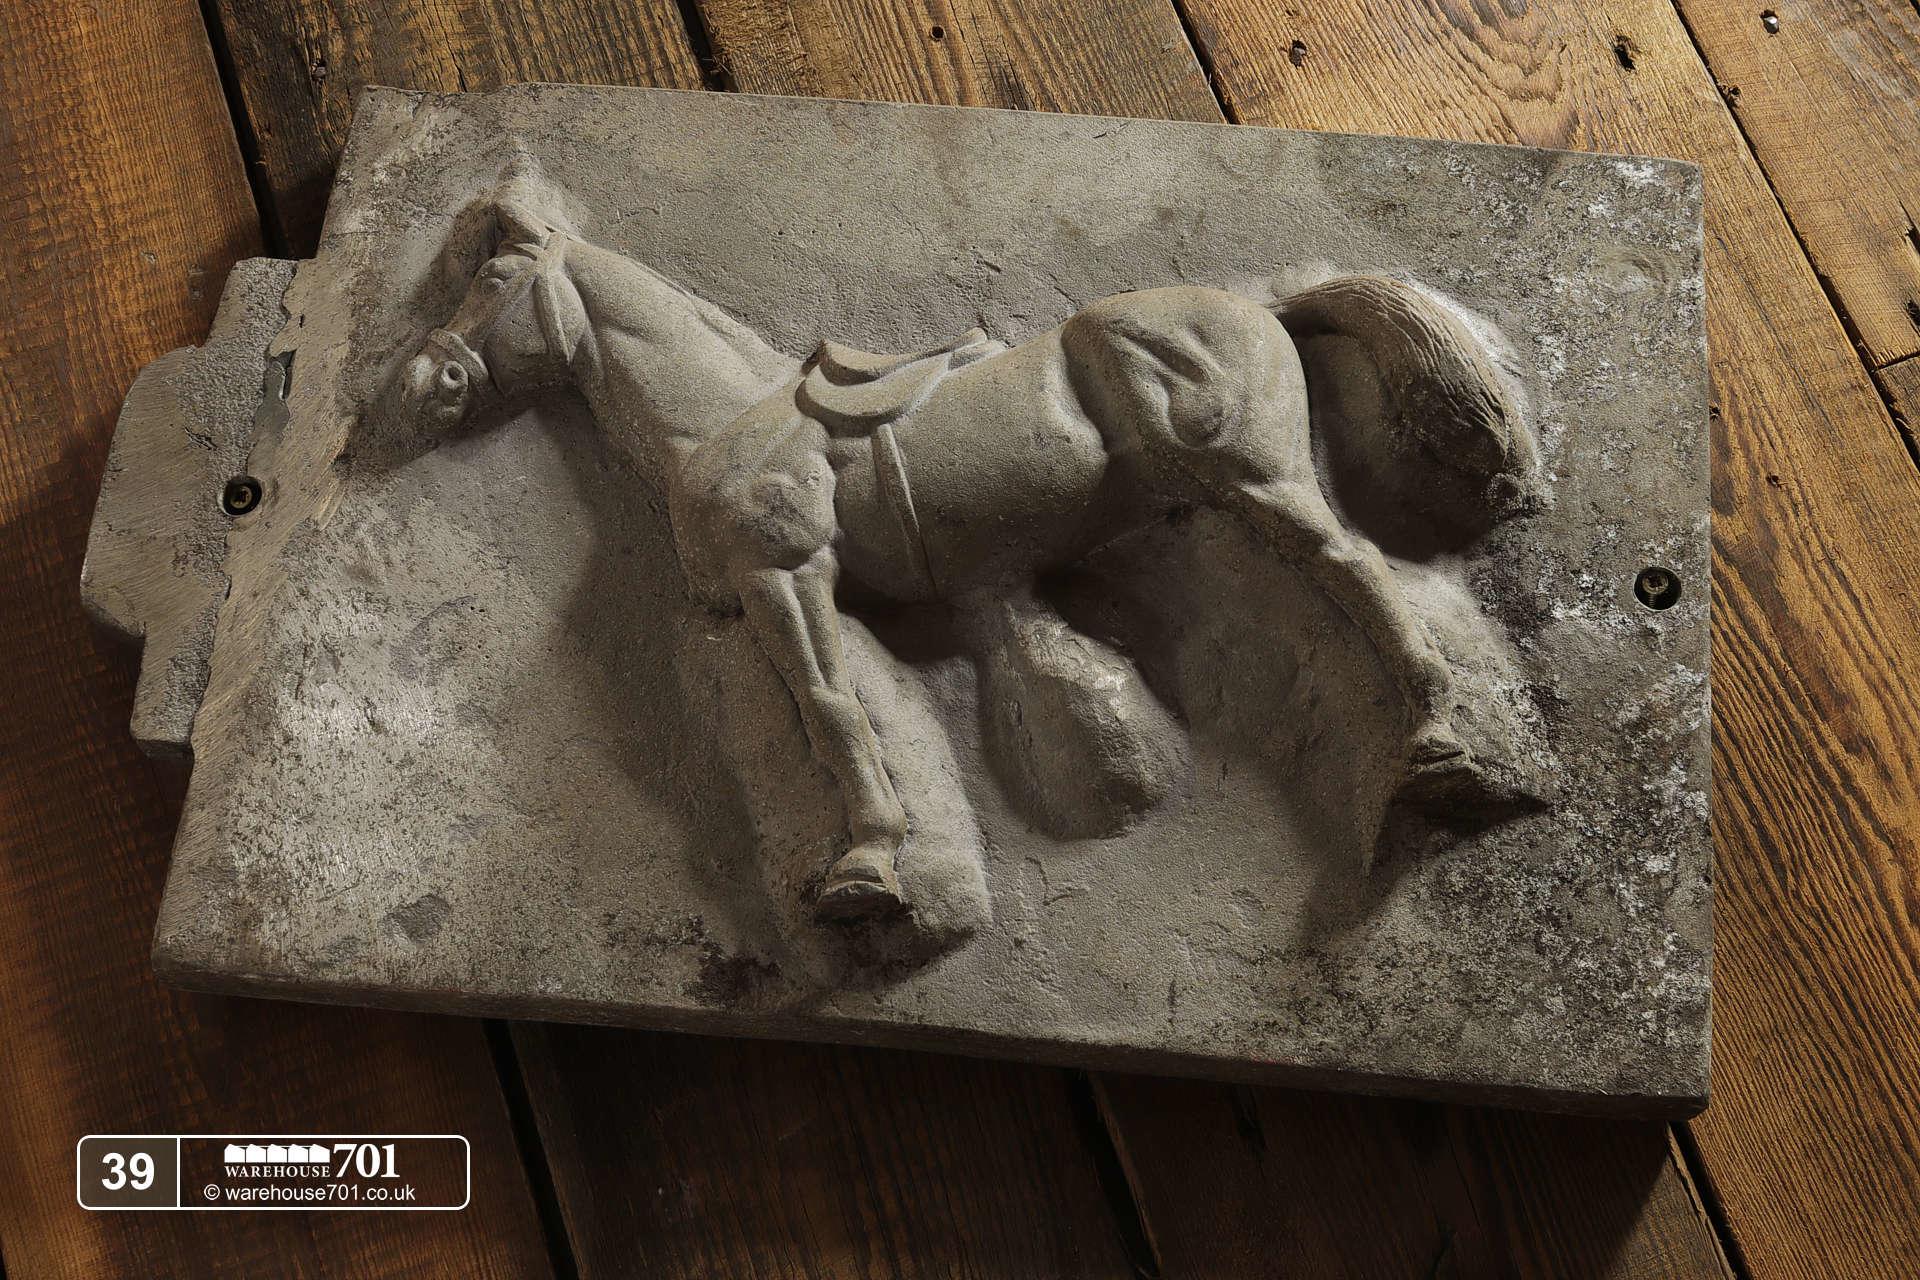 Aluminium Foundry Castings of Horses (No's 38, 39, 40, 41) for Shop, Retail and Home Display #7